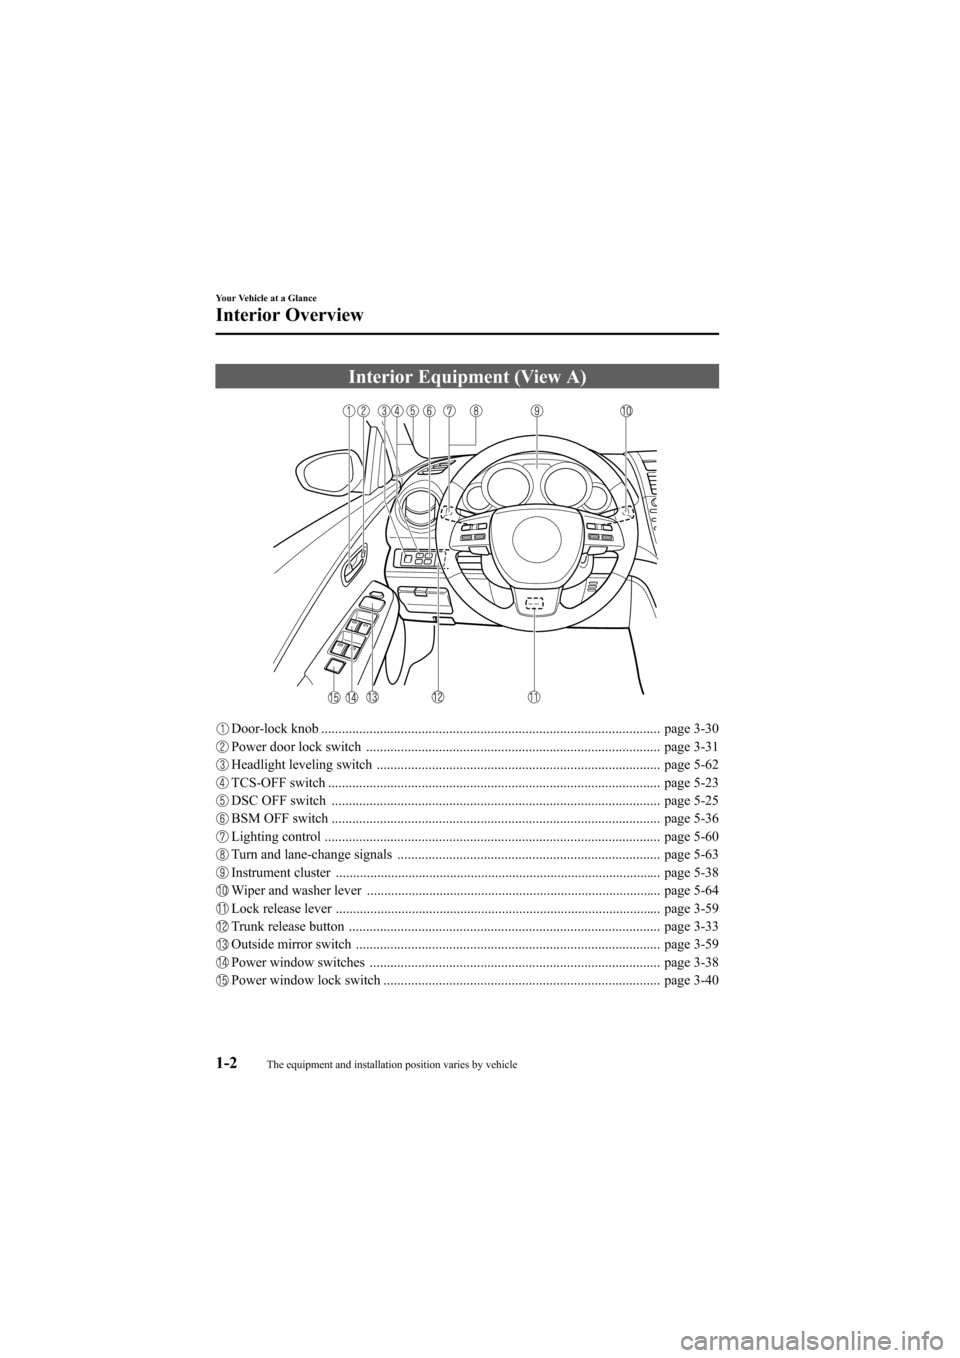 MAZDA MODEL 6 2009  Owners Manual (in English) Black plate (8,1)
Interior Equipment (View A)
Door-lock knob .................................................................................................. page 3-30
Power door lock switch .......